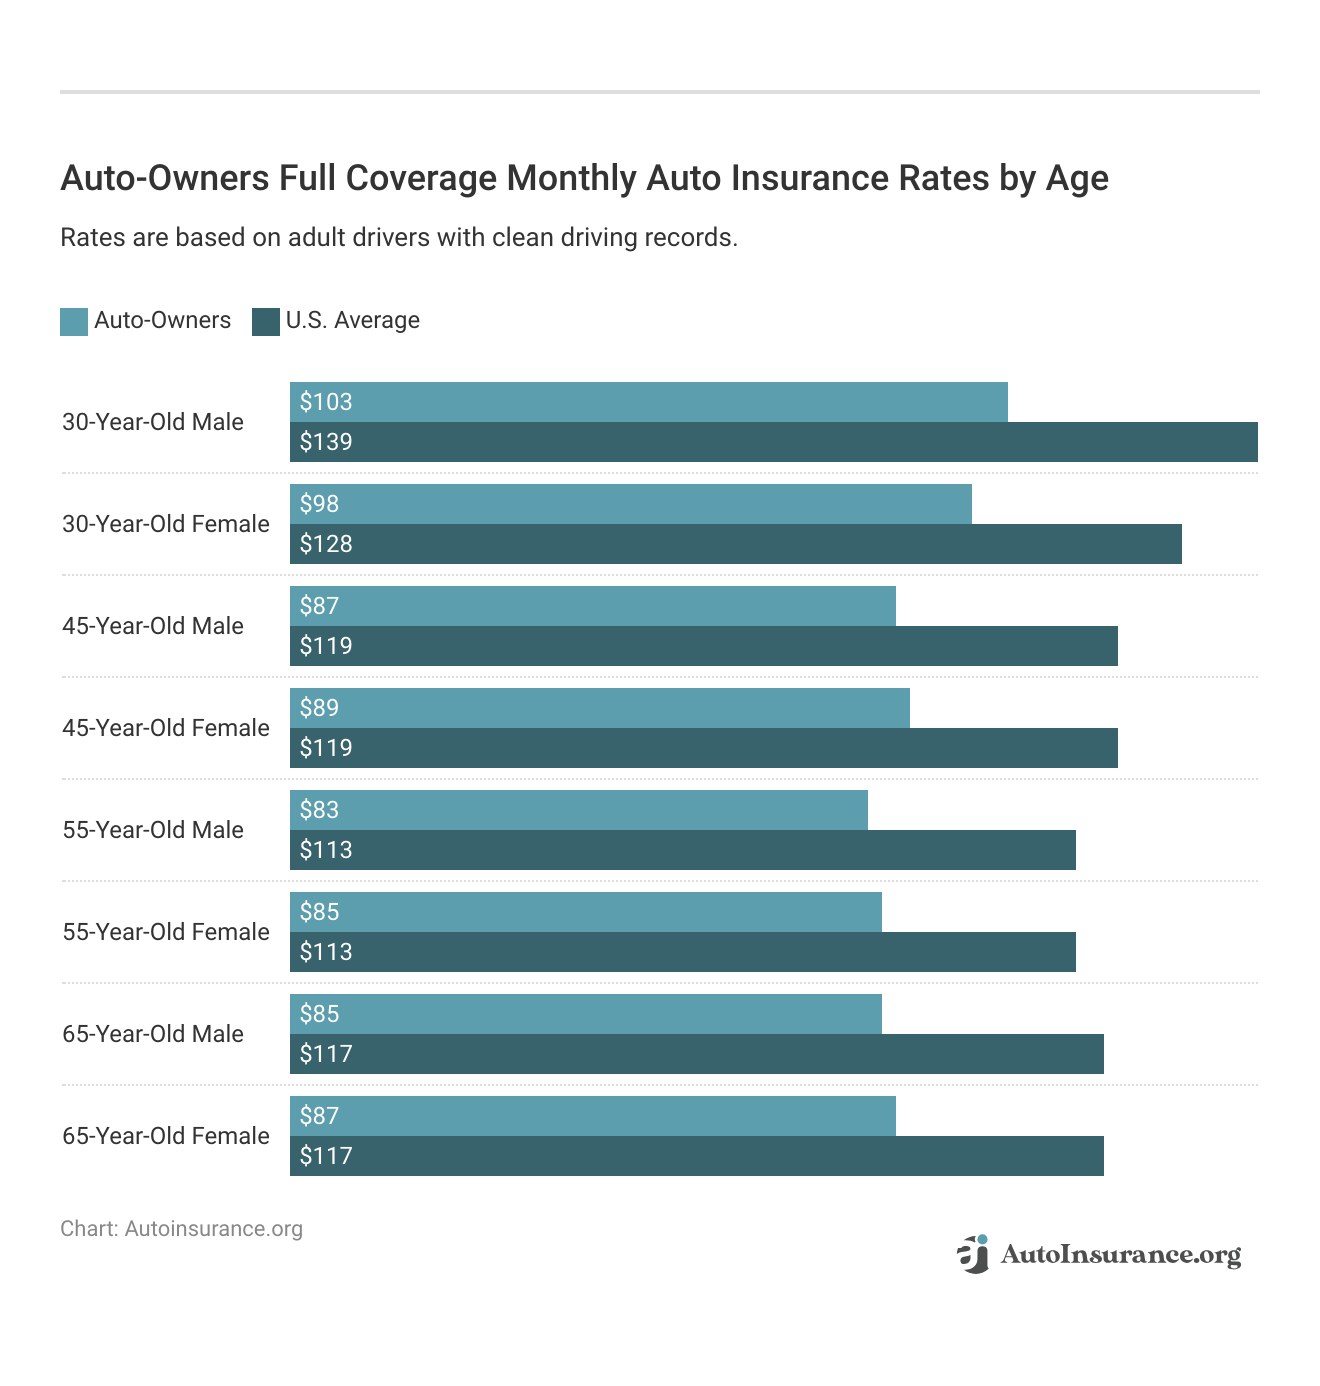 <h3>Auto-Owners Full Coverage Monthly Auto Insurance Rates by Age</h3>